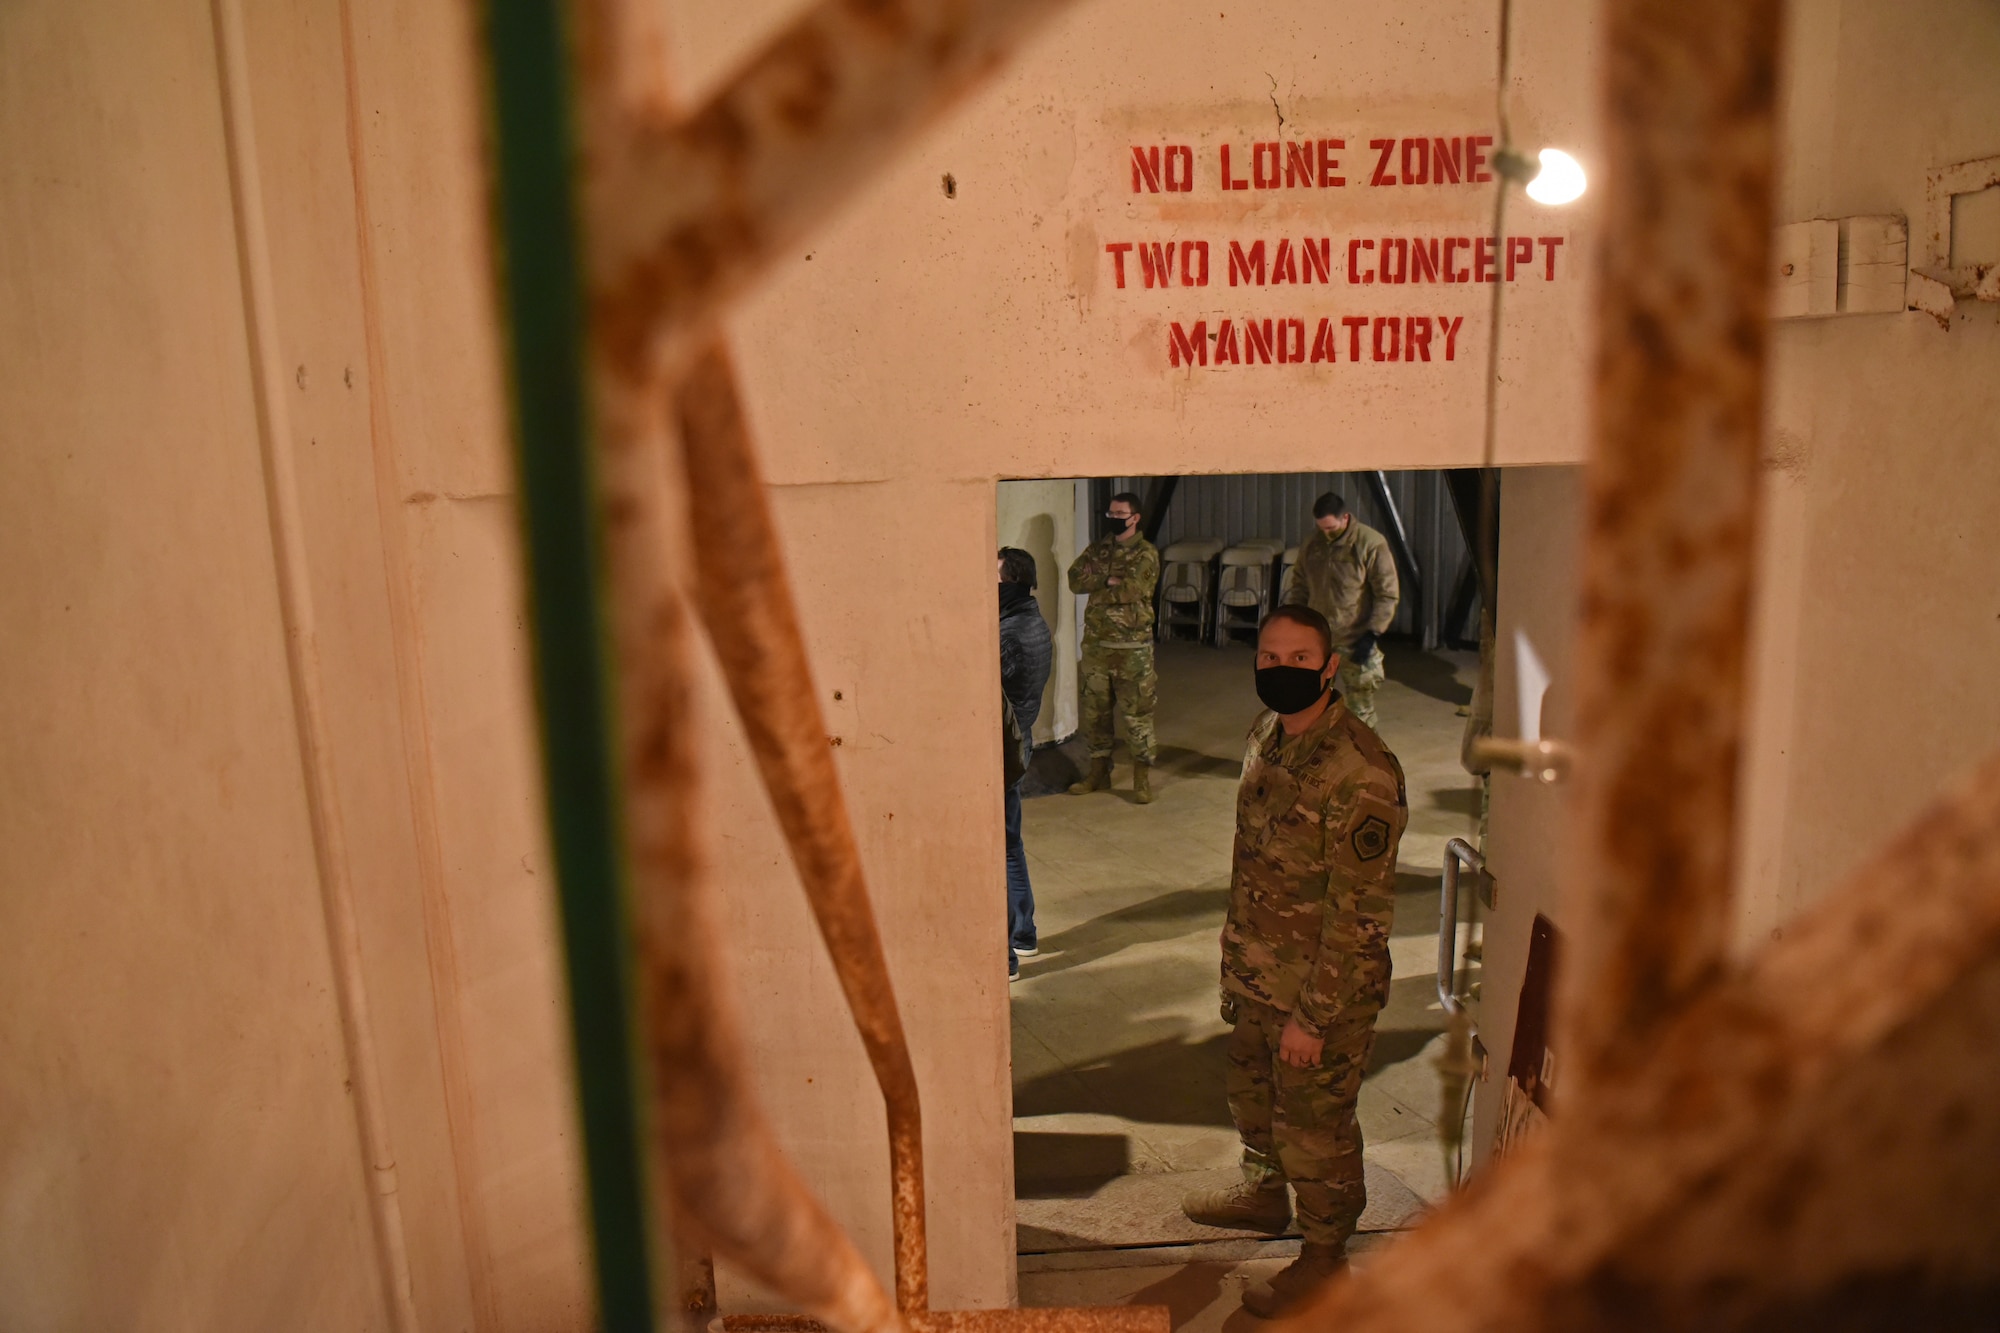 U.S. Air Force Lt Col. John Bergmans, 315th Training Squadron commander, enters the Lawn Atlas Missile Base’s missile silo while exploring the narratives of actual personnel deployed to the site during the Cuban Missile Crisis in Lawn, Texas, Dec. 3, 2020. Bergmans attended the Staff Ride to LAMB in support of the 17th Training Wing Heritage Campaign Plan that was founded on Air Force heritage and the Airmen Warrior Ethos among attending personnel.. (U.S. Air Force photo by Senior Airman Abbey Rieves)